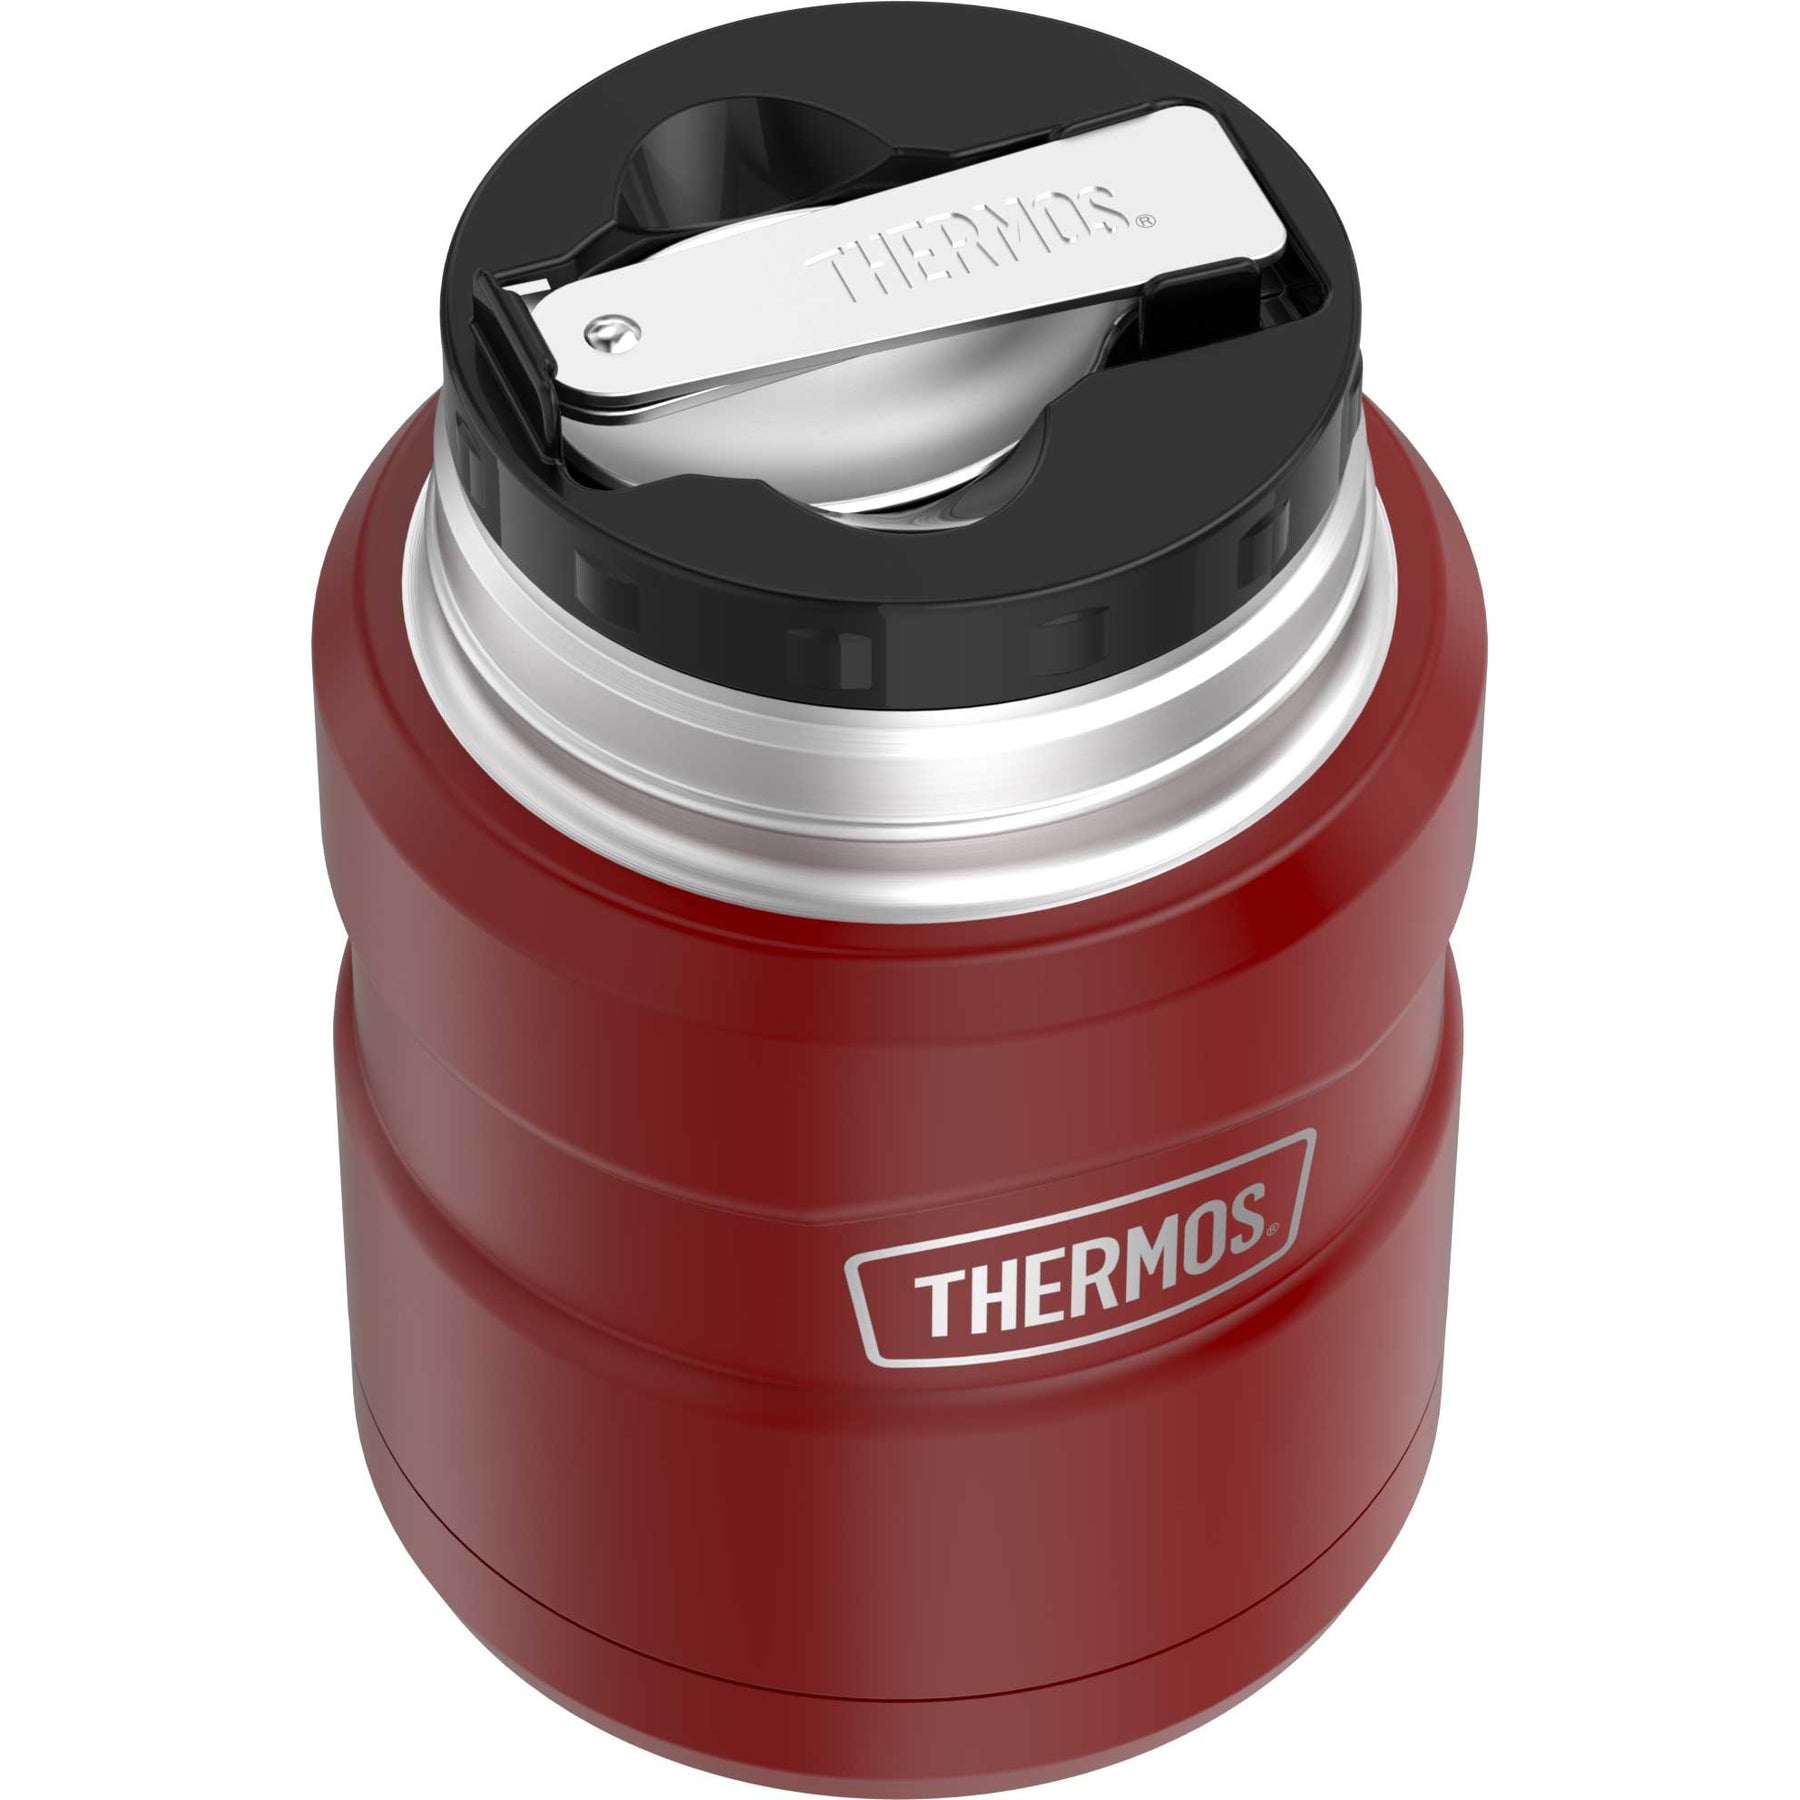 Thermos Stainless King SK3000 Vacuum-Insulated Food Jar with Spoon, 16 Ounce, Midnight Blue